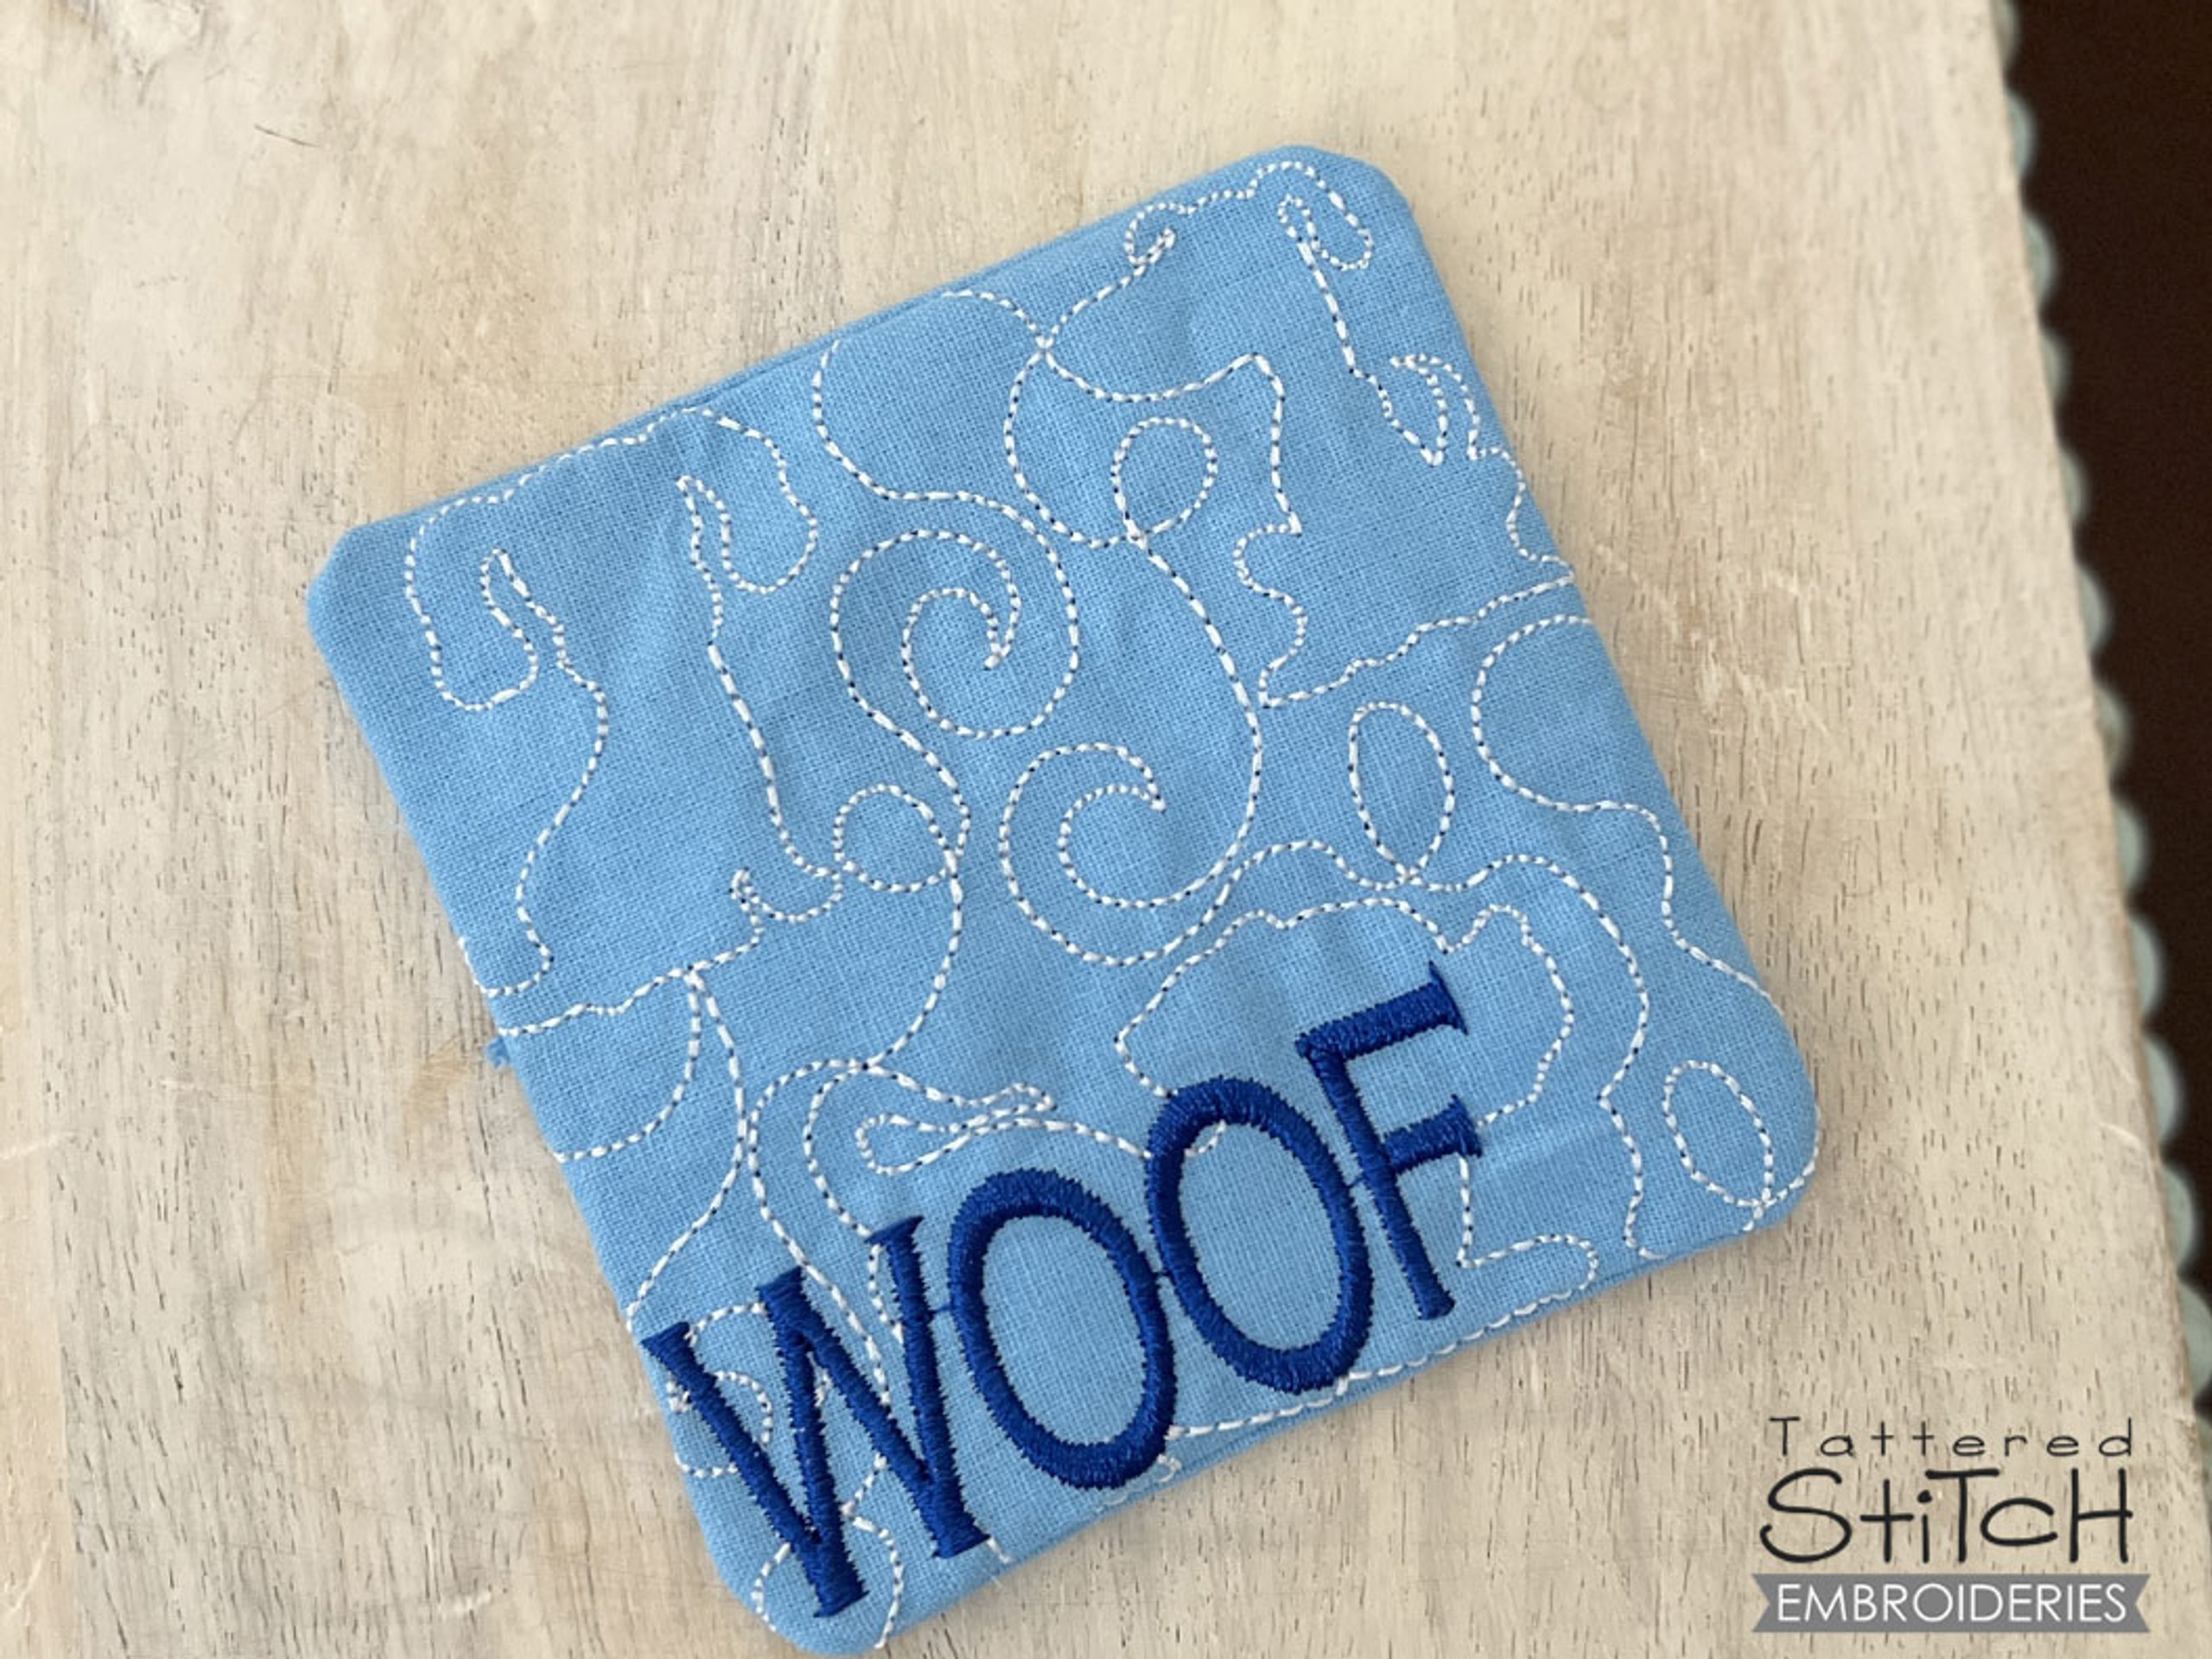 Dog Coaster - Embroidery Designs & Patterns - Tattered Stitch Embroideries